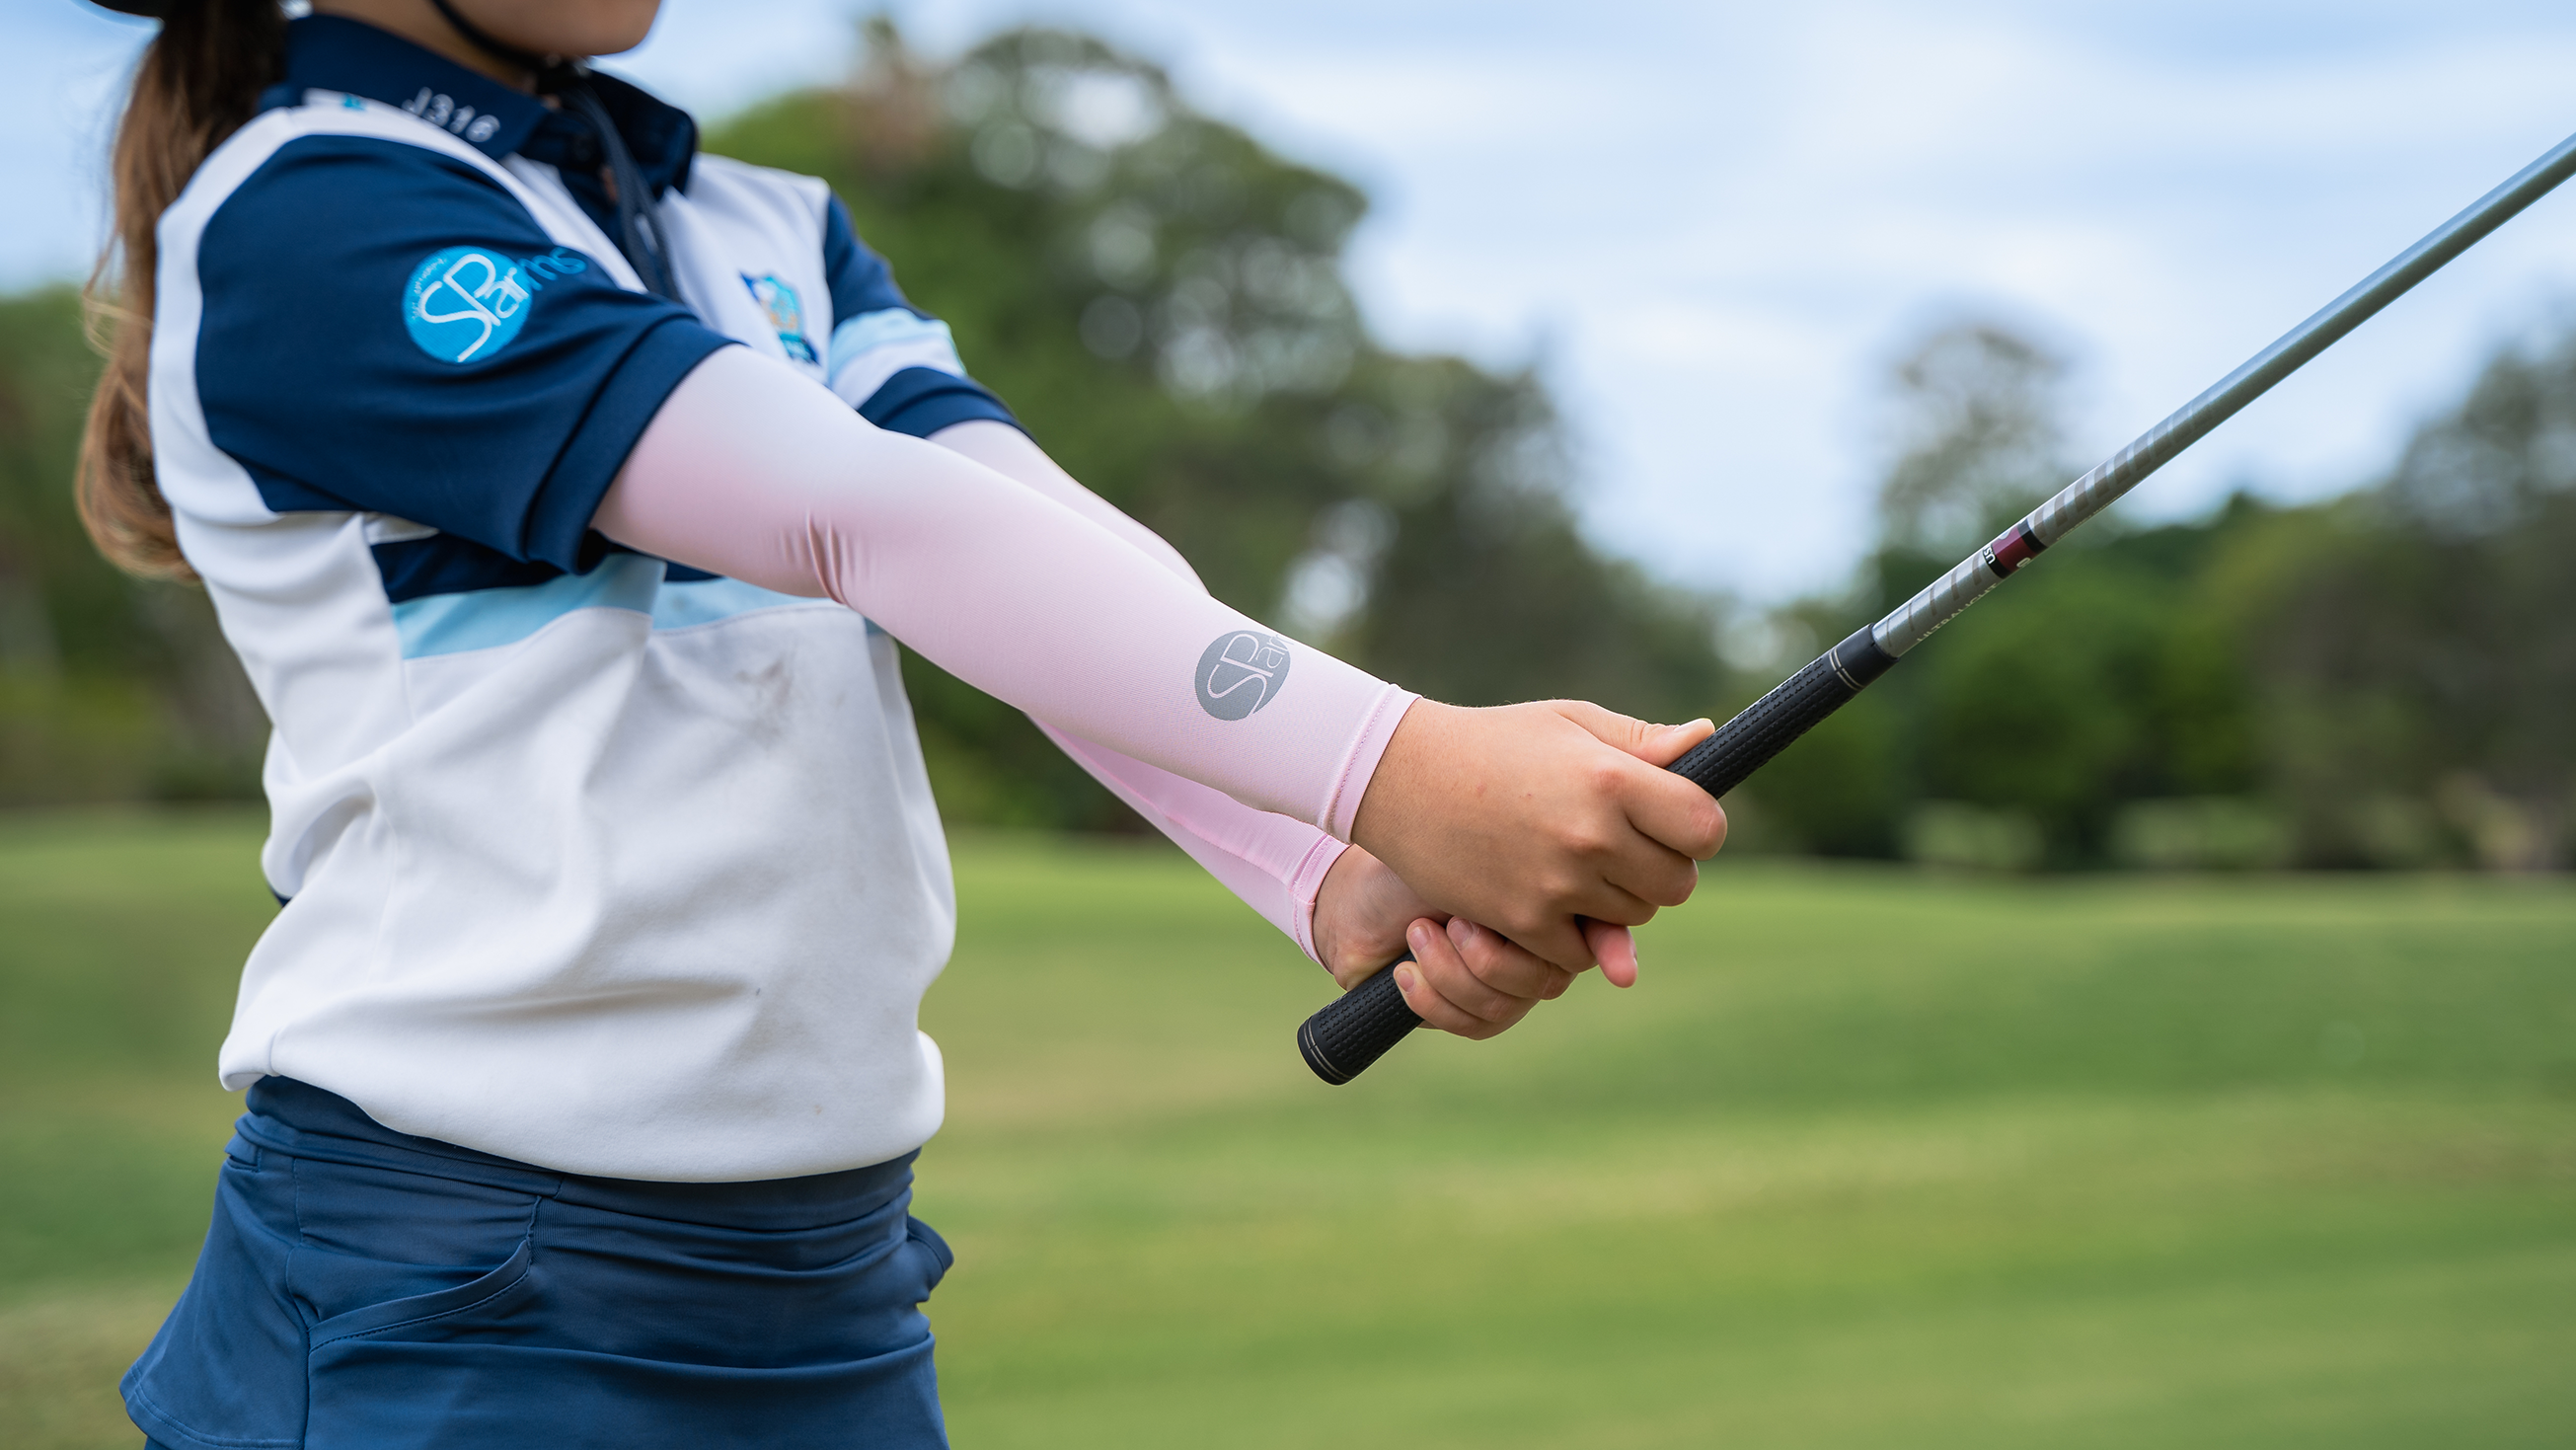 Image of a golfer wearing SParms sun protective sleeves.